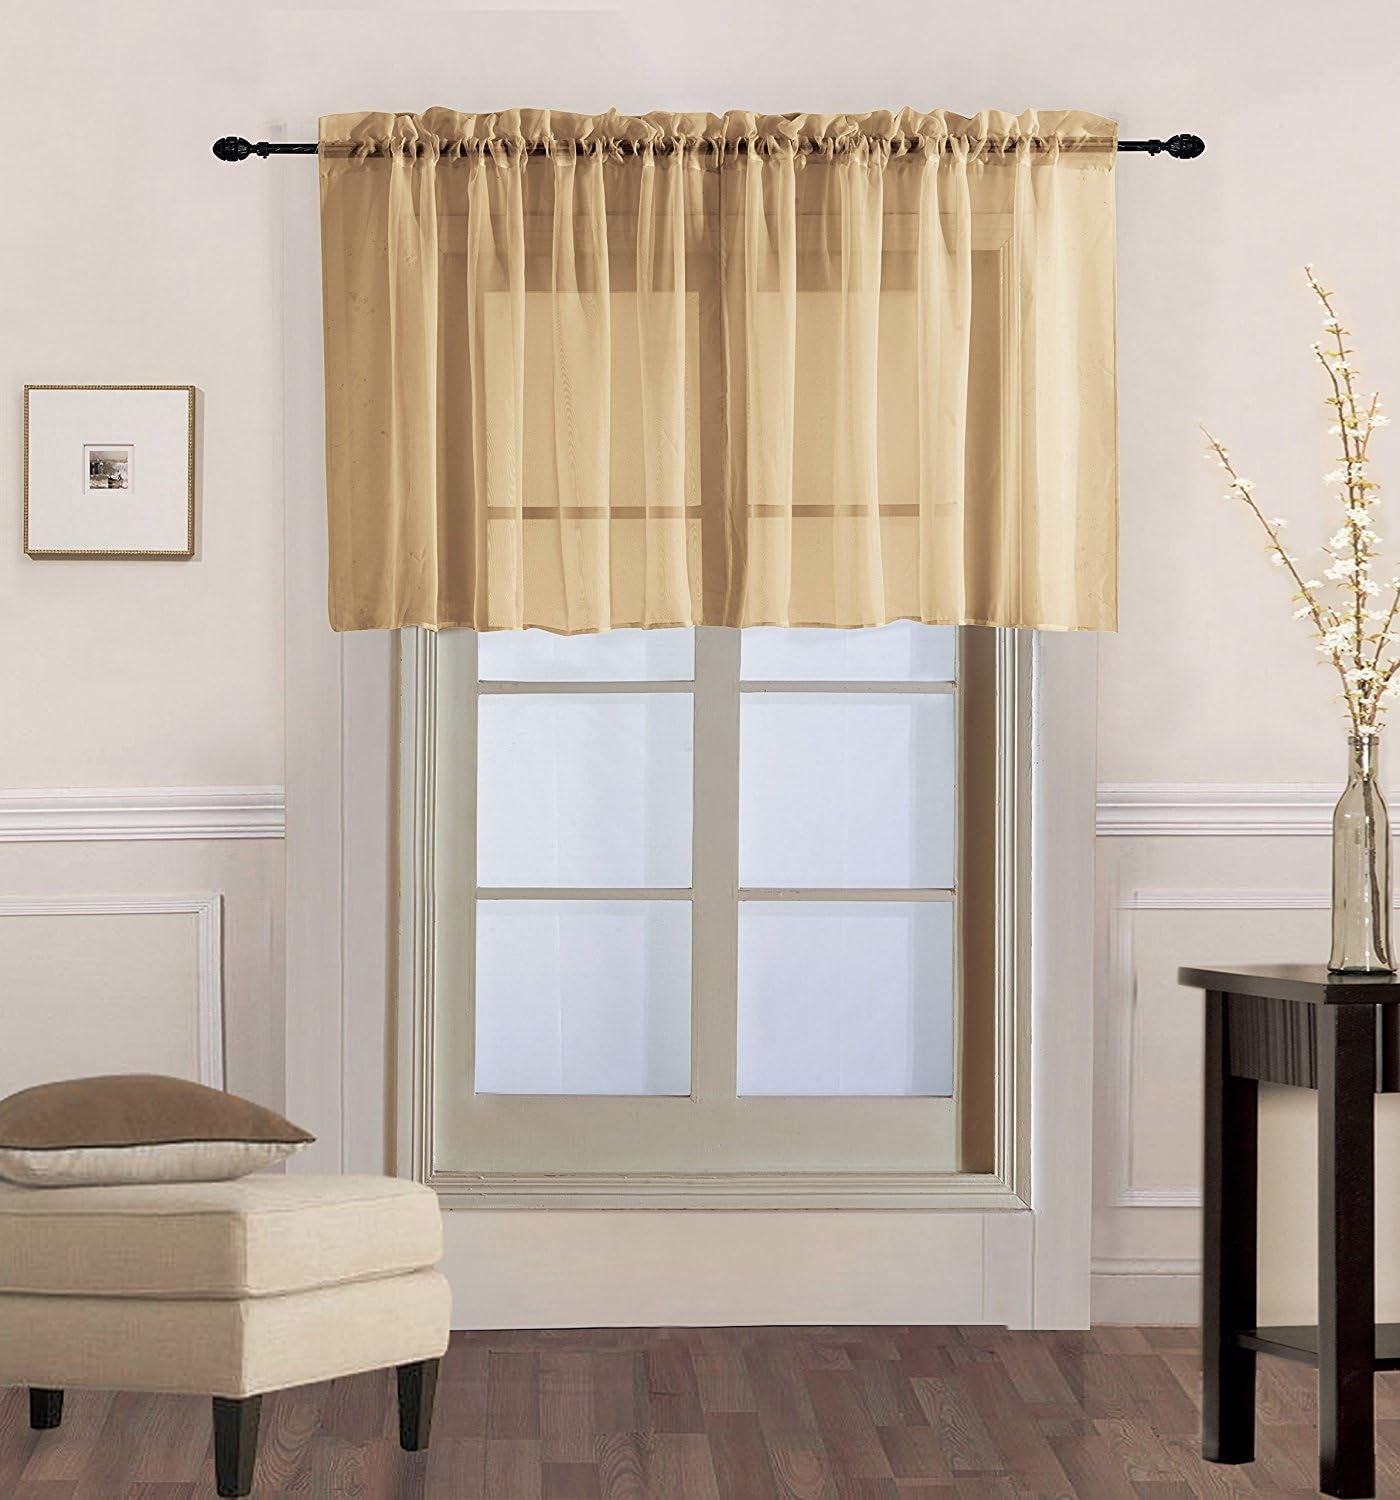 Elitehomeproducts EHP Luxury 1PC Sheer Voile Straight Valance (Fully Stitched) (54" X 14", White)